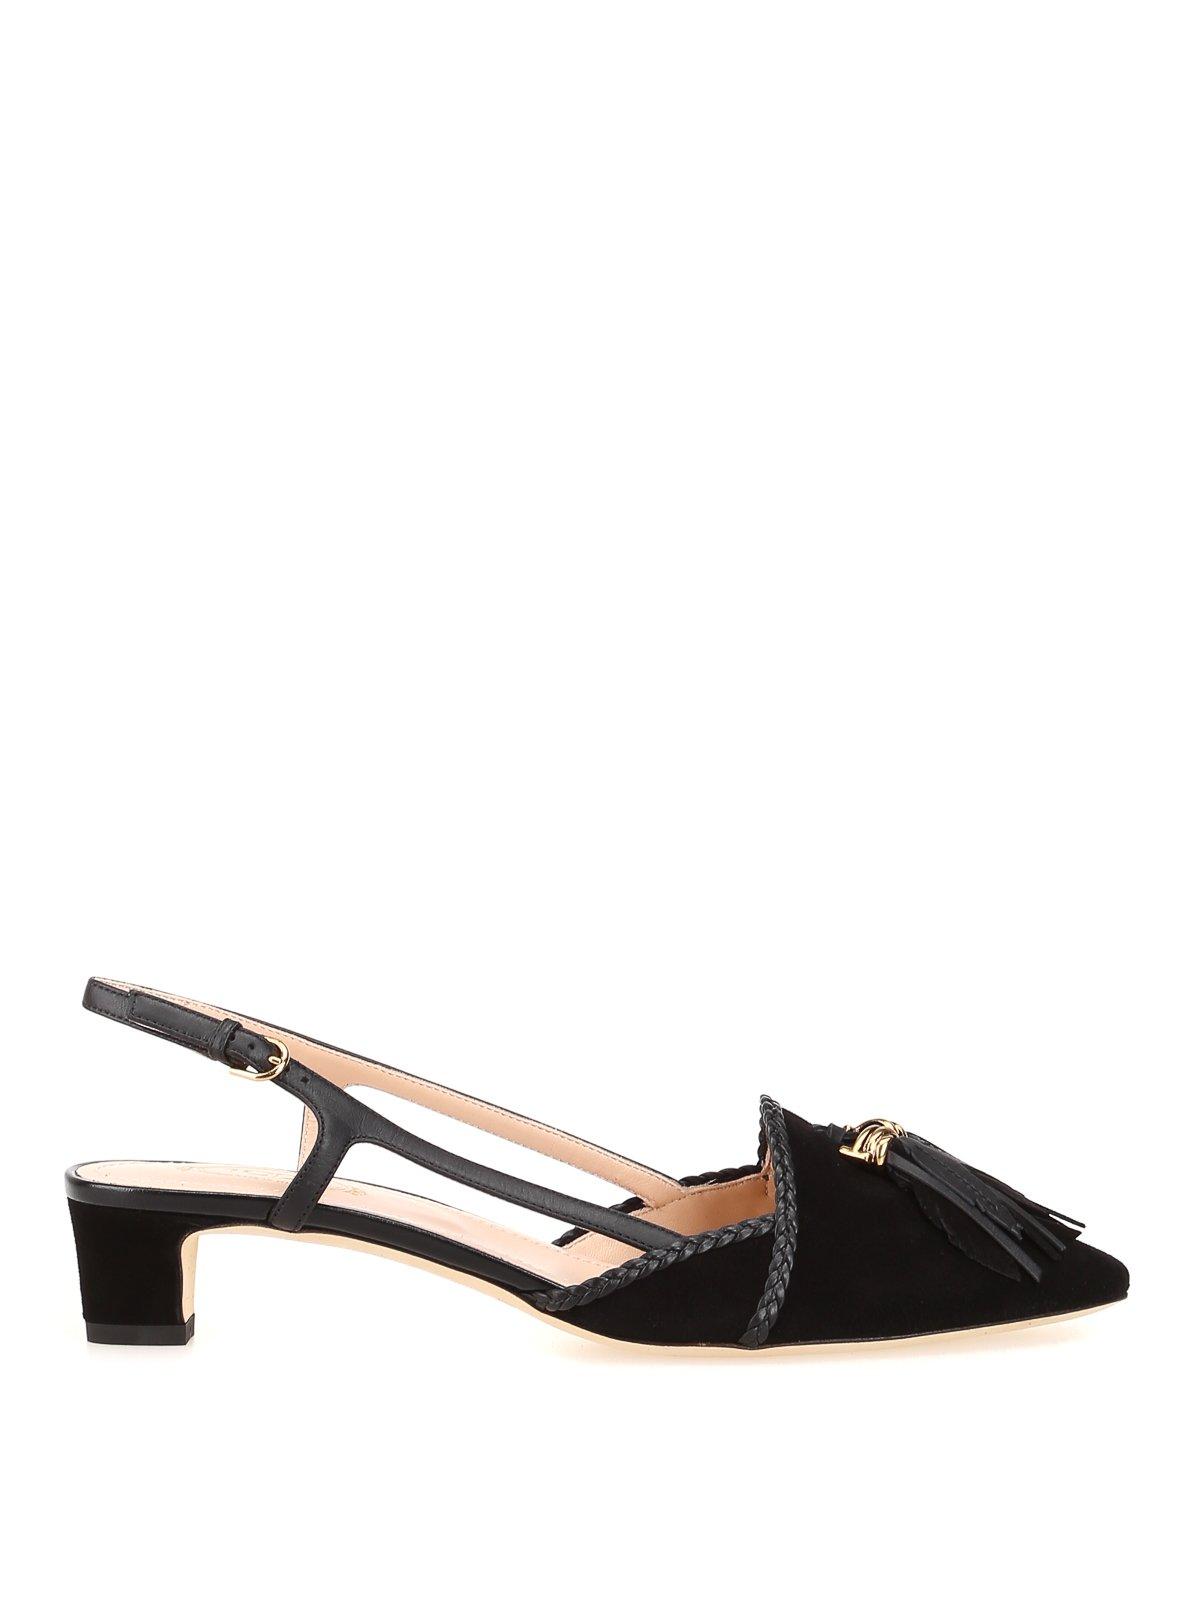 Tod's Leather Leaf Charm Slingback Pumps in Black - Lyst